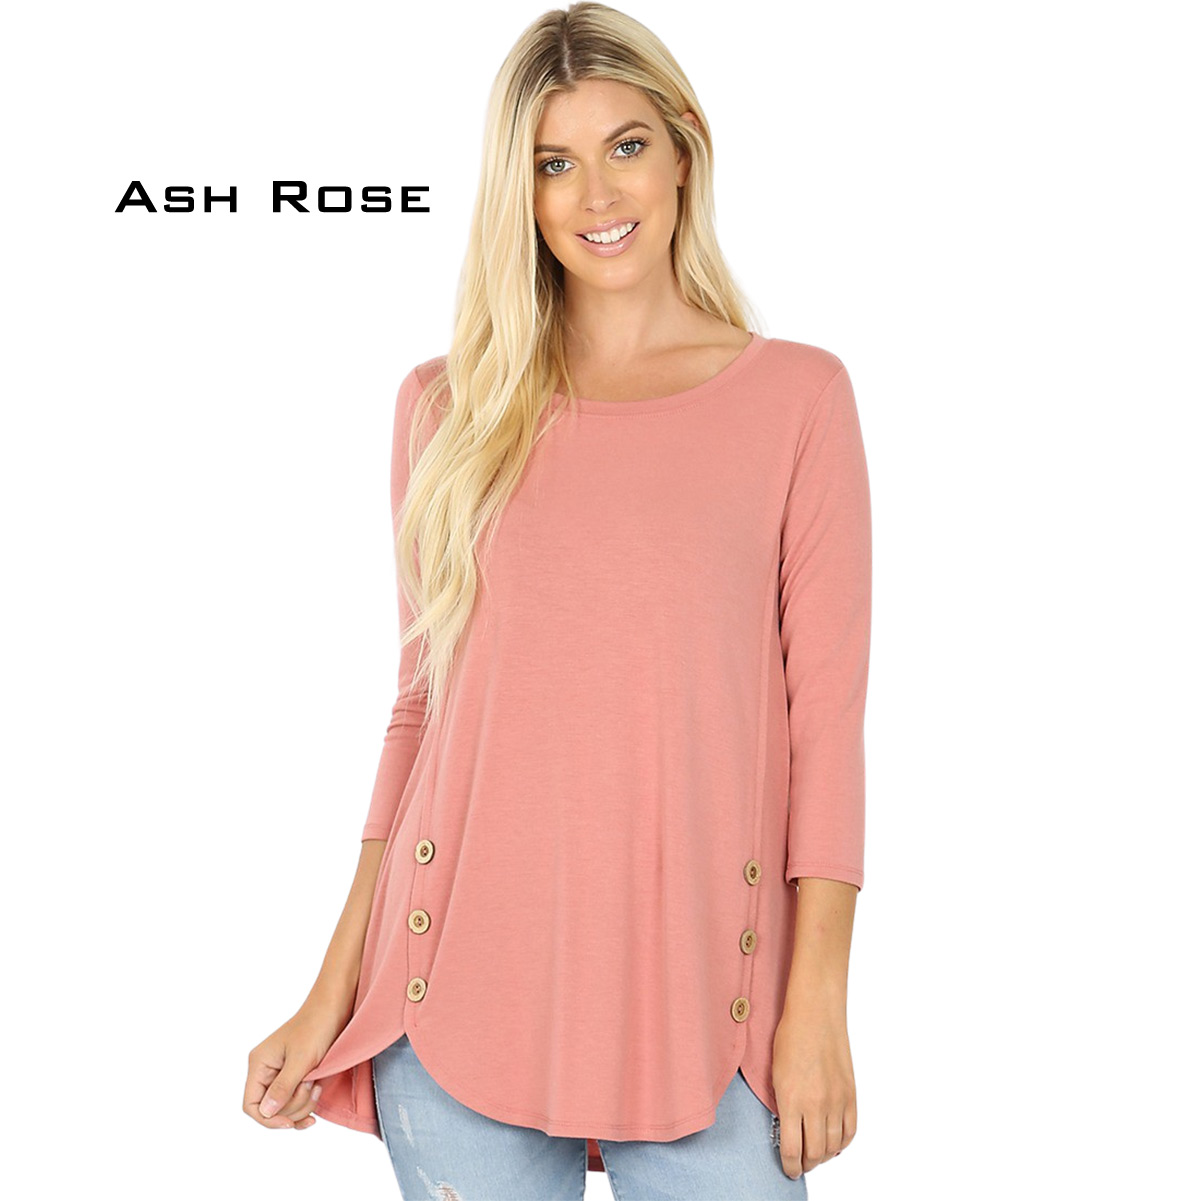 2032 - 3/4 Sleeve Side Wood Button Tops ASH ROSE 3/4 Sleeve Side Wood Buttons Top 2032 - Medium